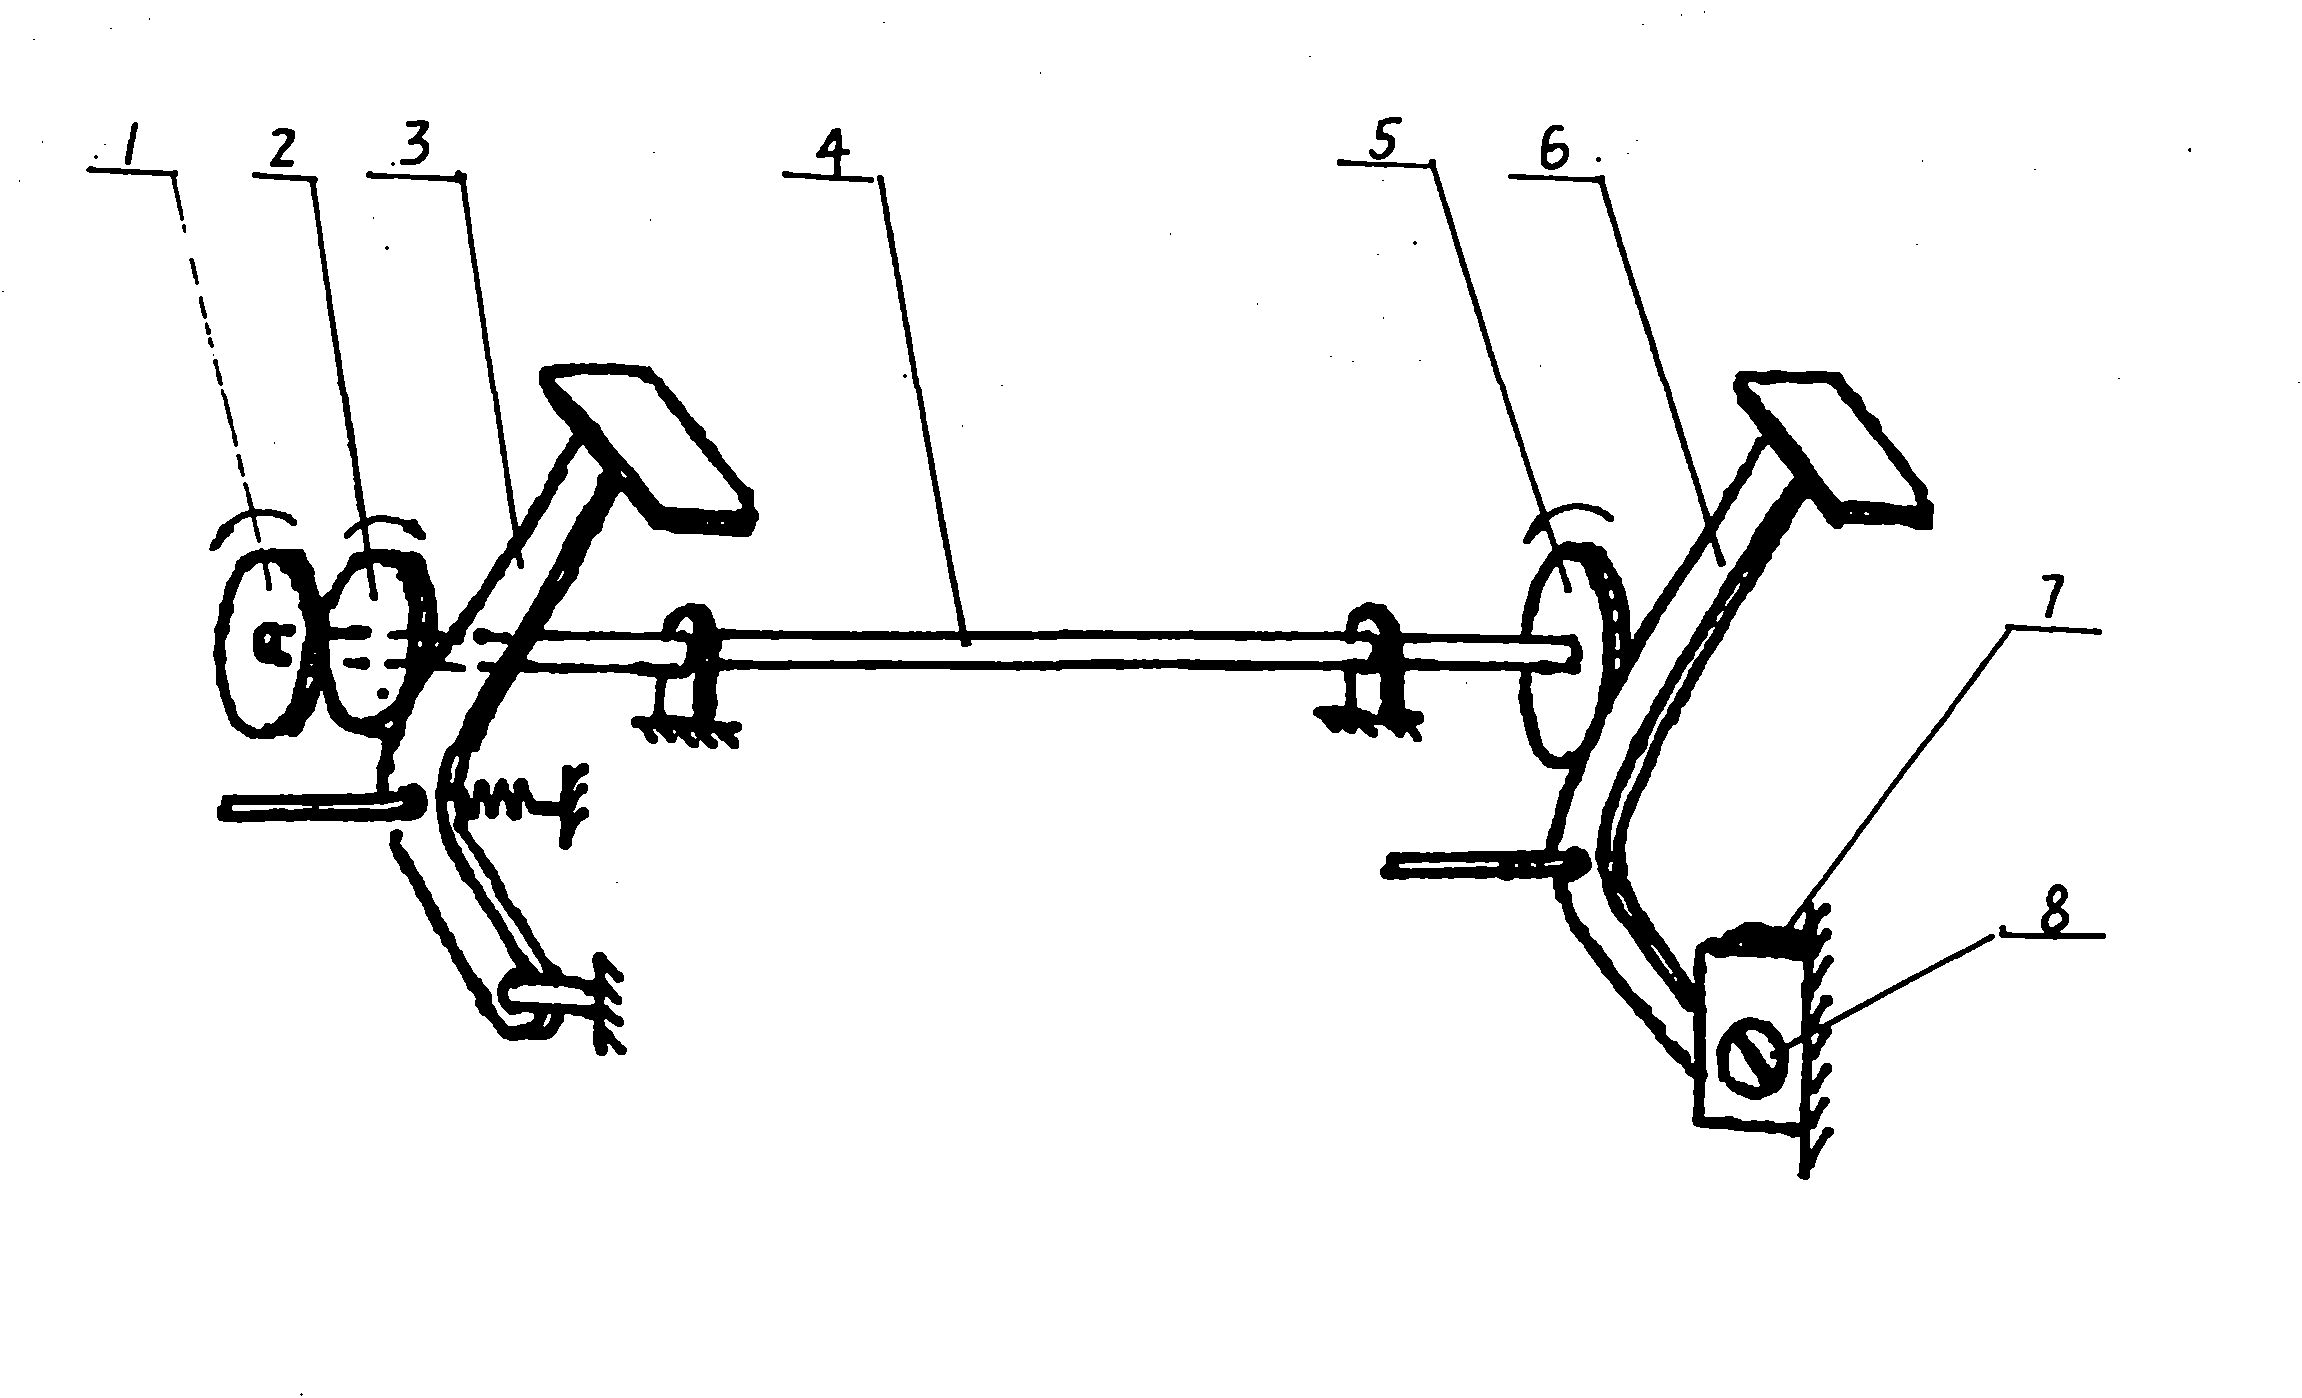 Accelerated pedal with self-locking and driven resetting functions